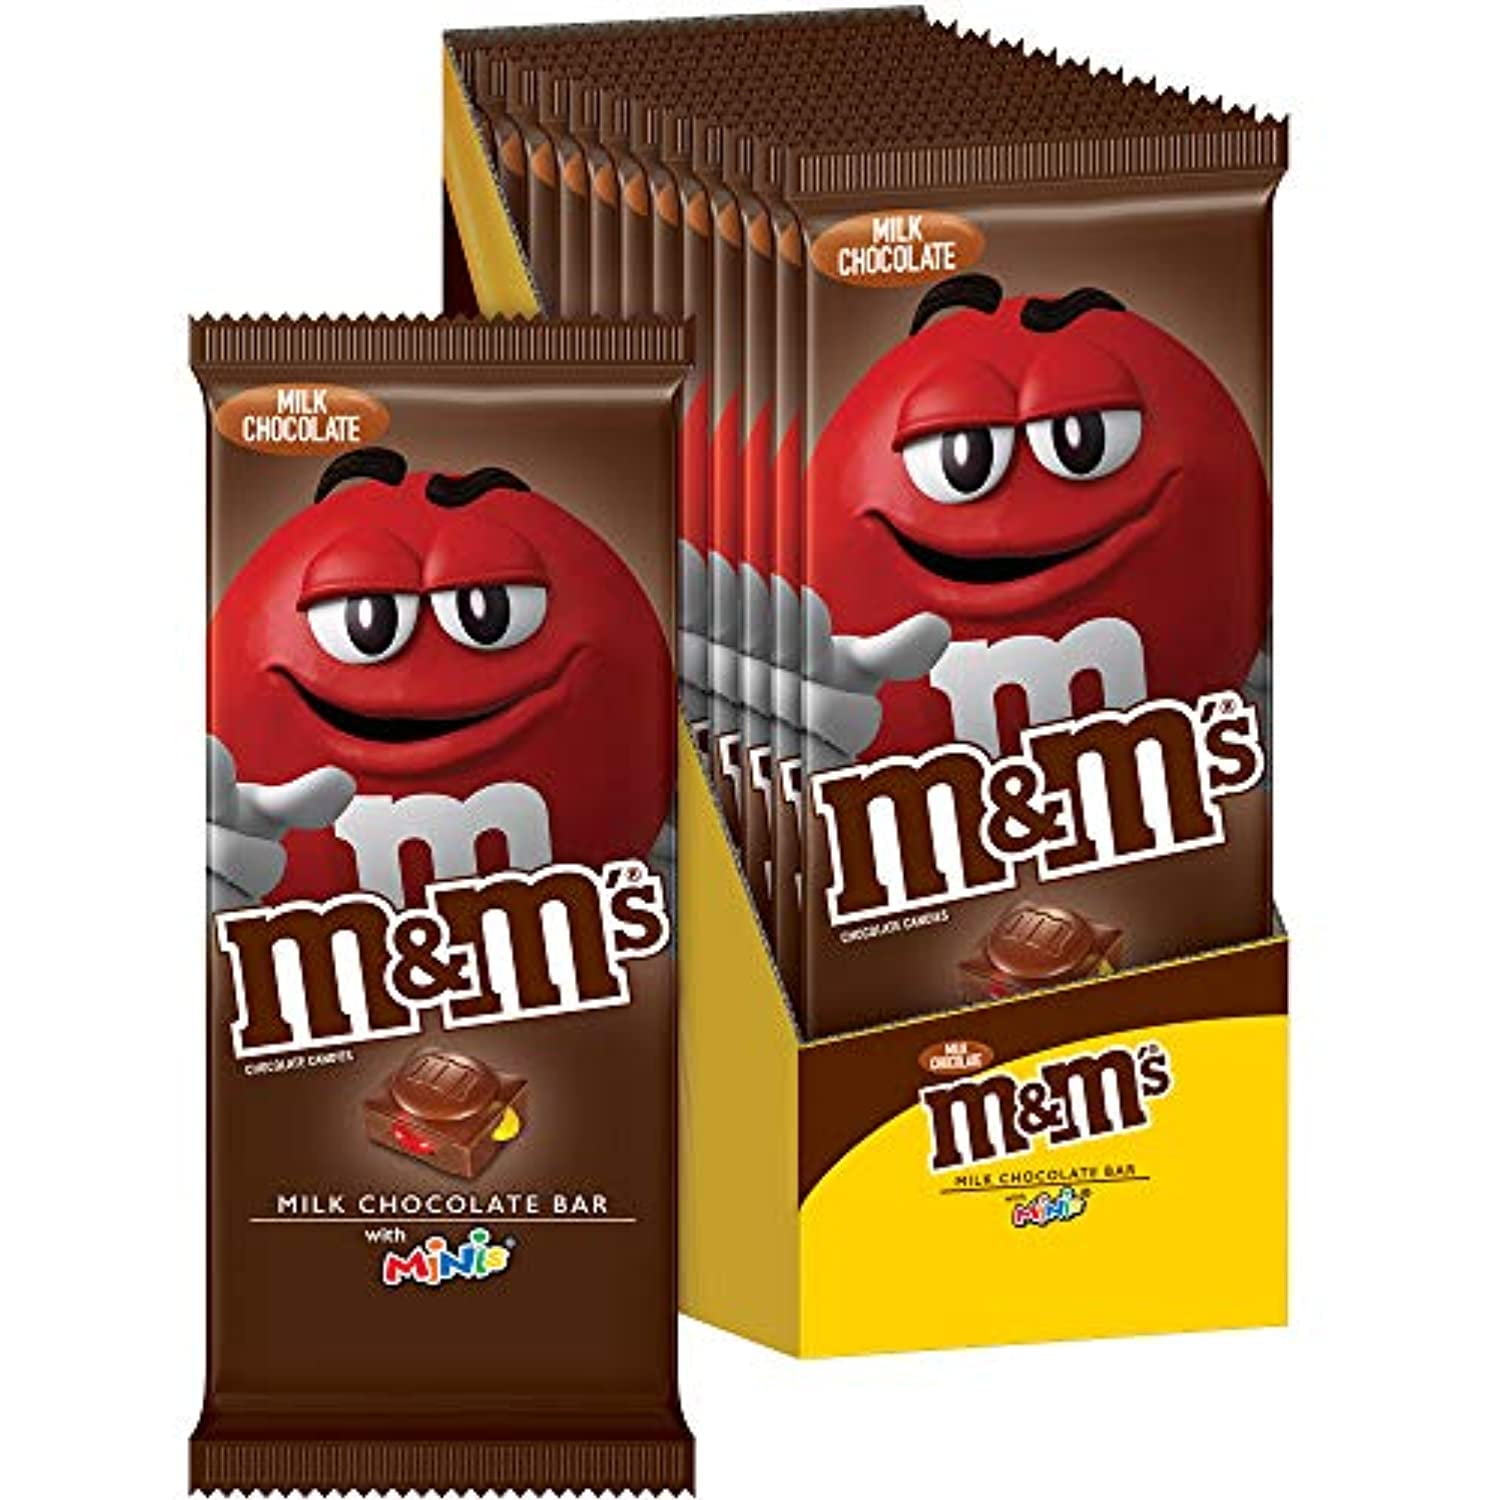 Home Collectionz - M&M's Crispy chocolate Bar 31g for only 4'500